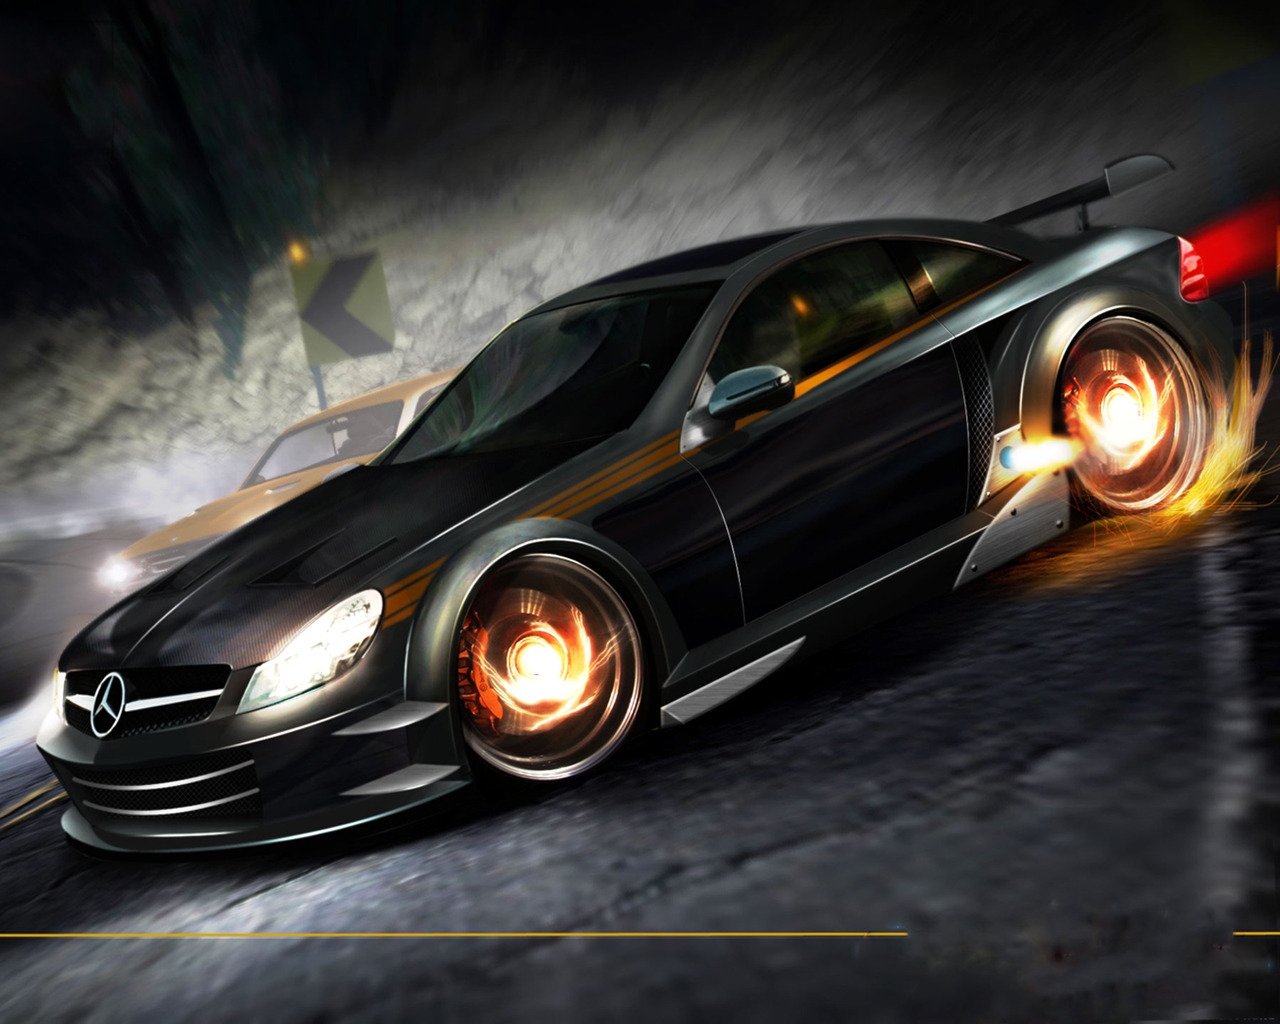 NFS Carbon Mercedes for 1280 x 1024 resolution